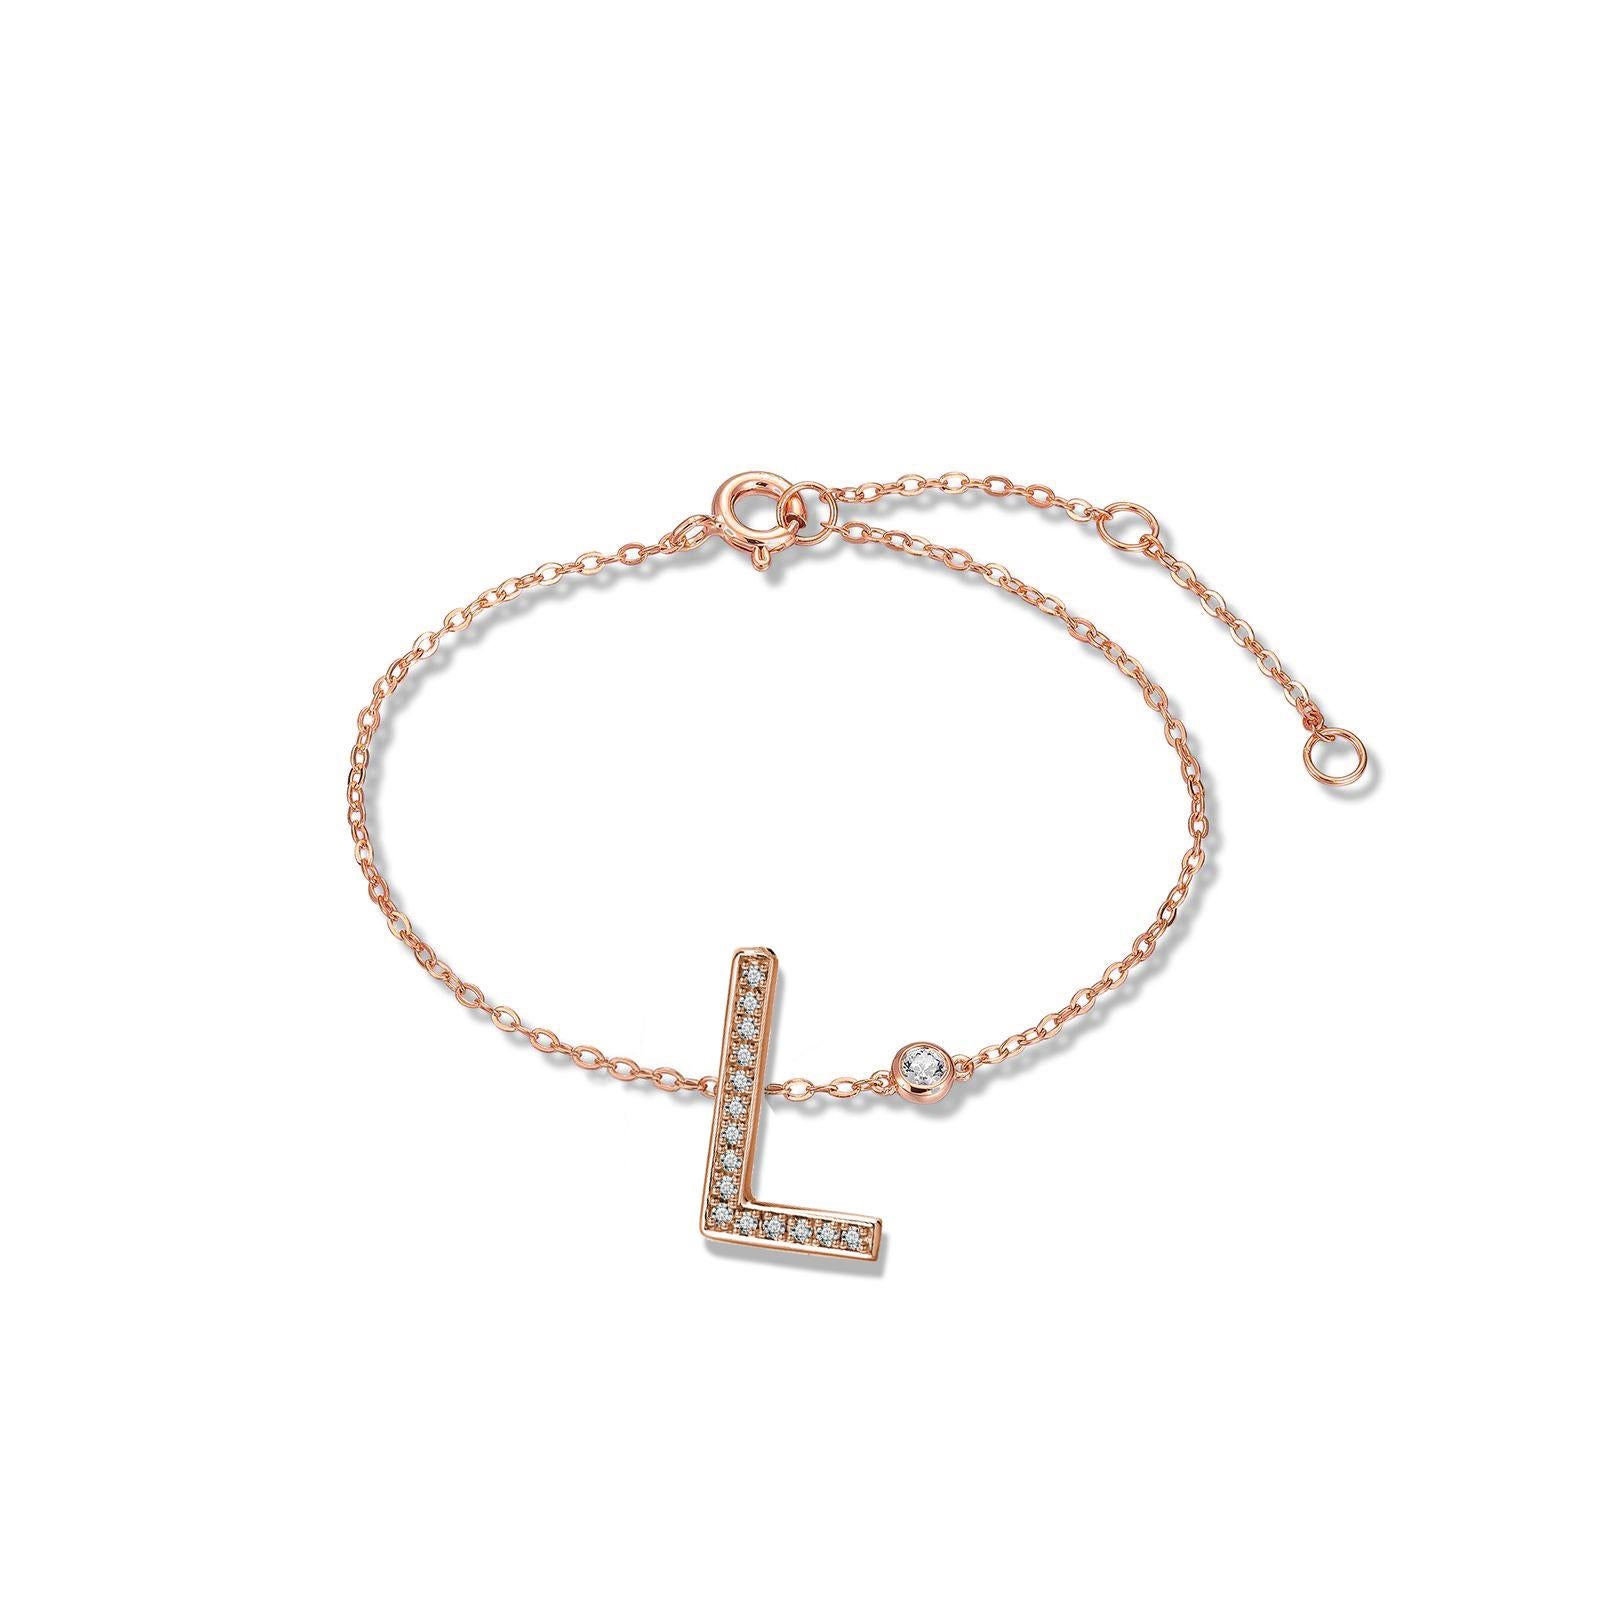 Nothing says YOU more than YOU. You are unique. You are bold.  You're not afraid to share who you are.  This initial bezel chain bracelet is elegantly slimline while sharing a little bit about yourself with others. .925 sterling silver base also